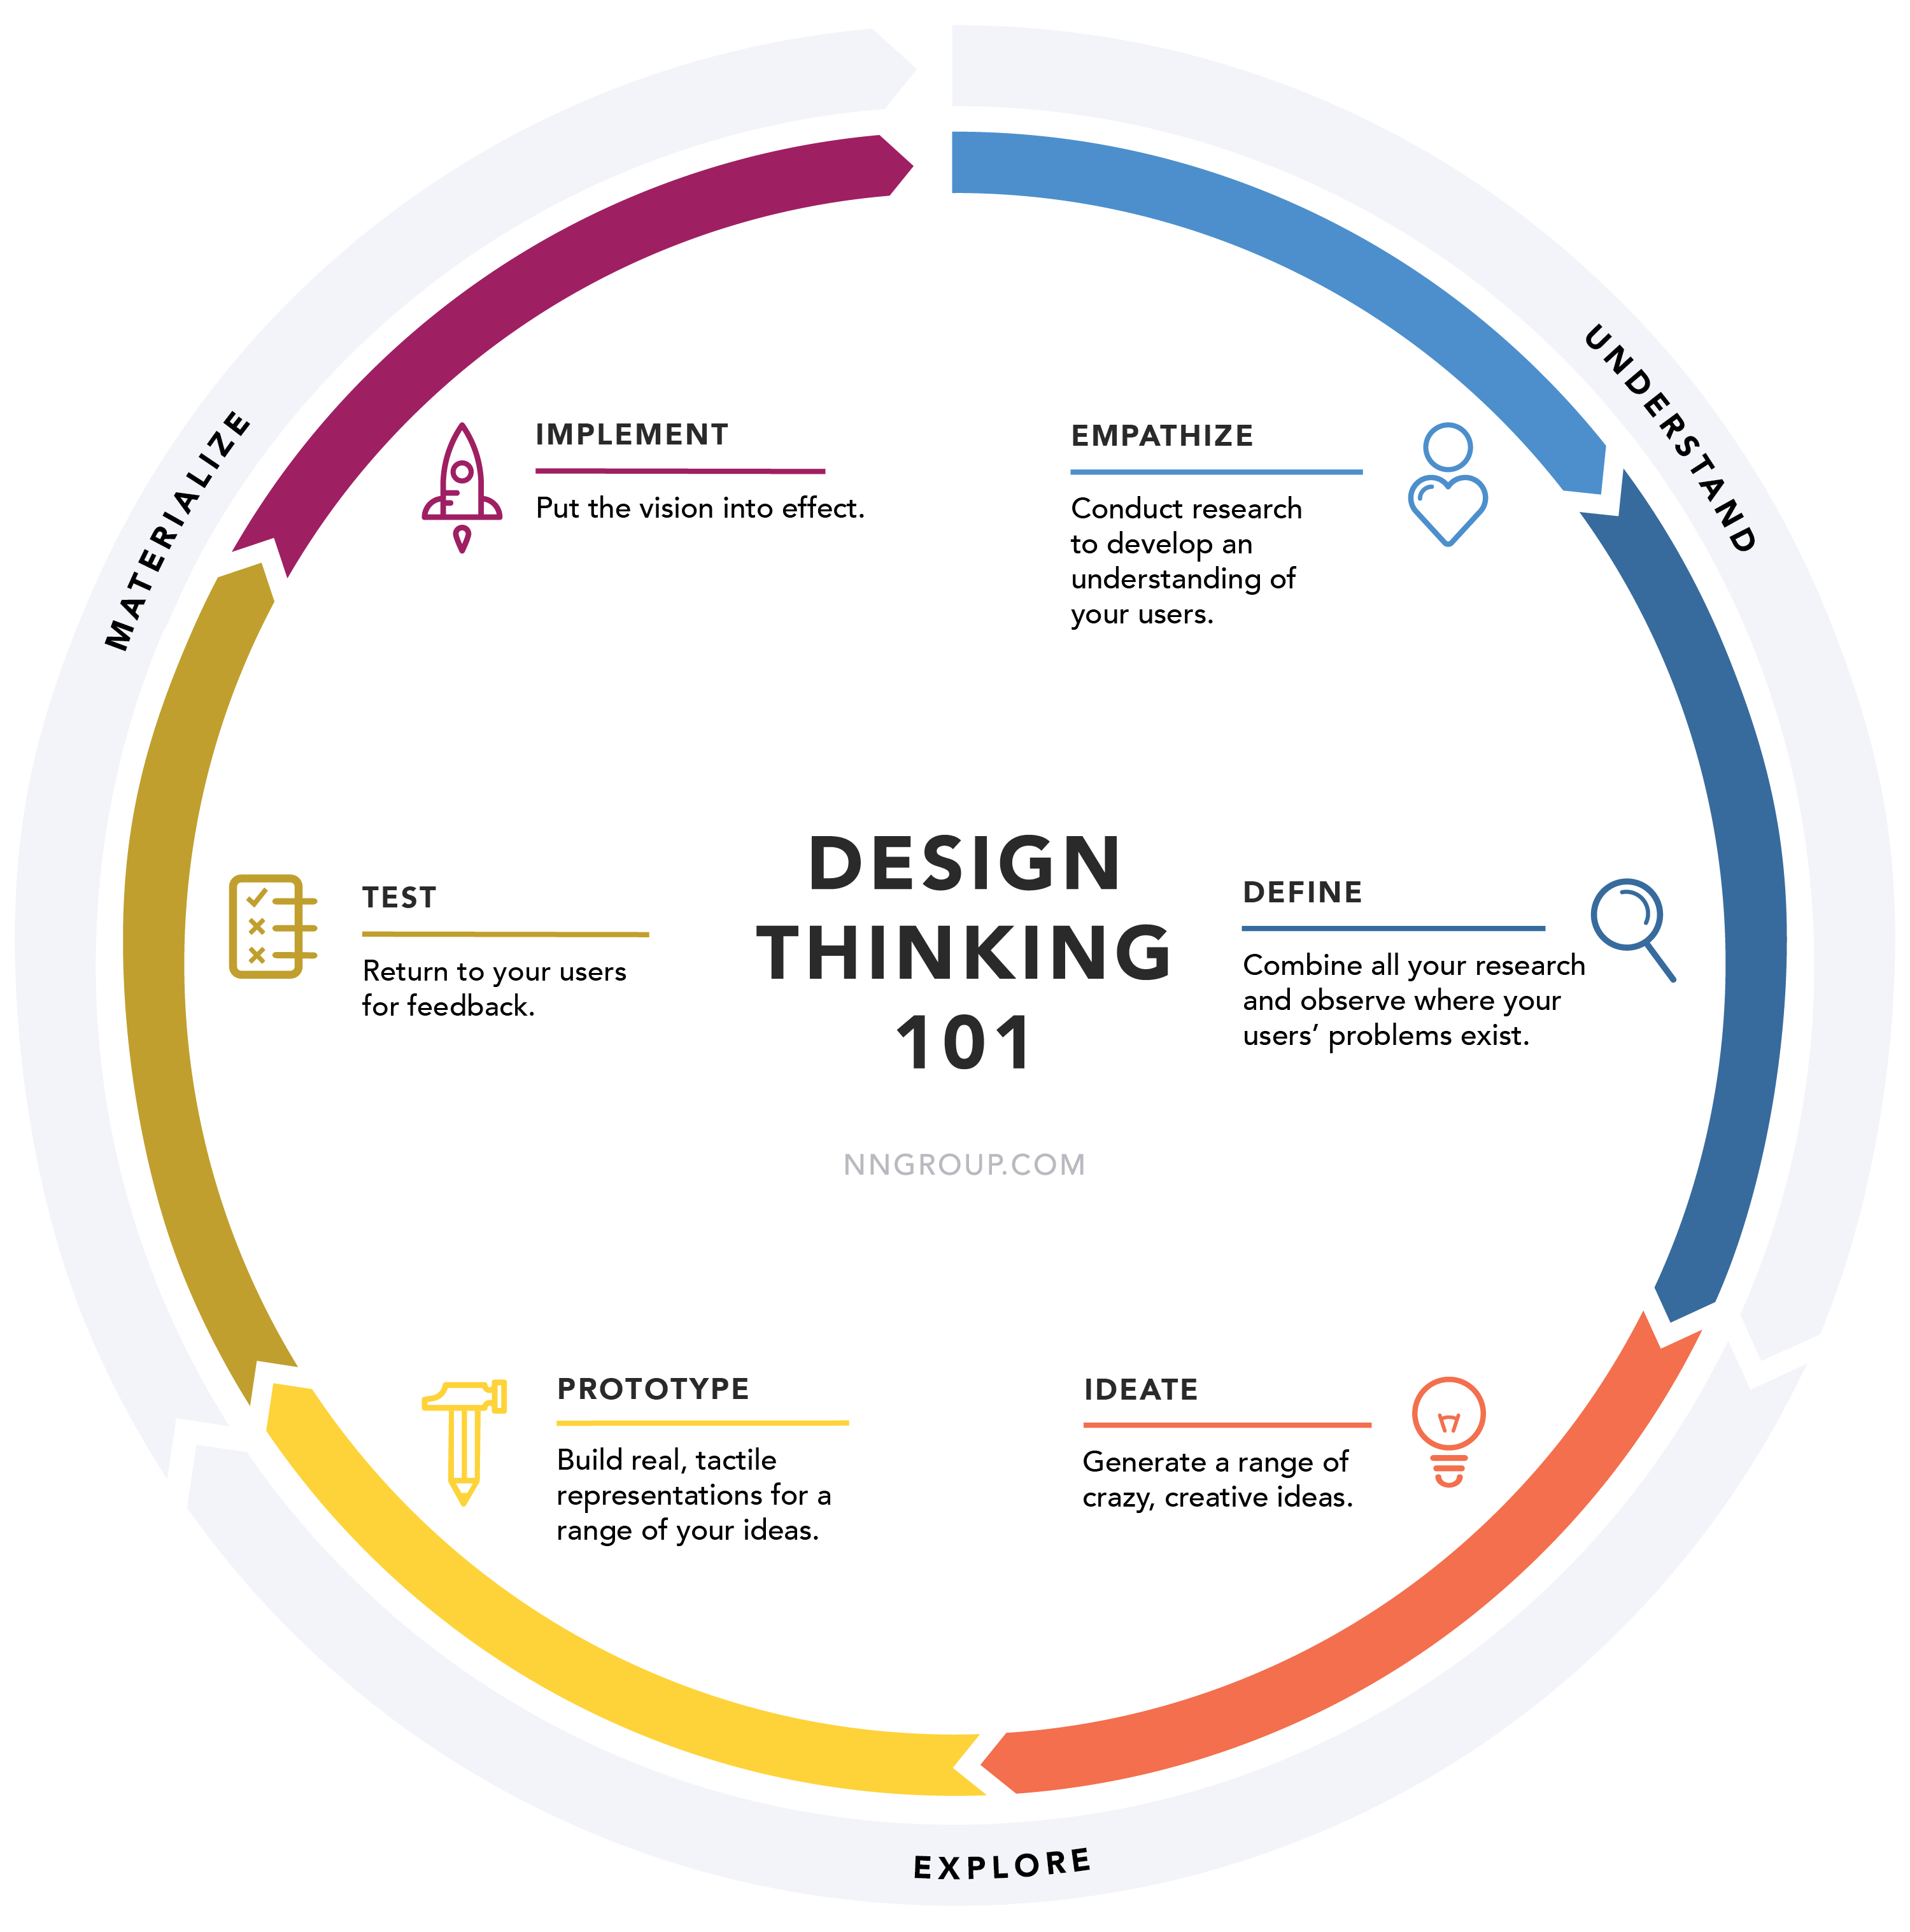 The 6 Design Thinking Phases: empathize, define, ideate, prototype, test, and implement